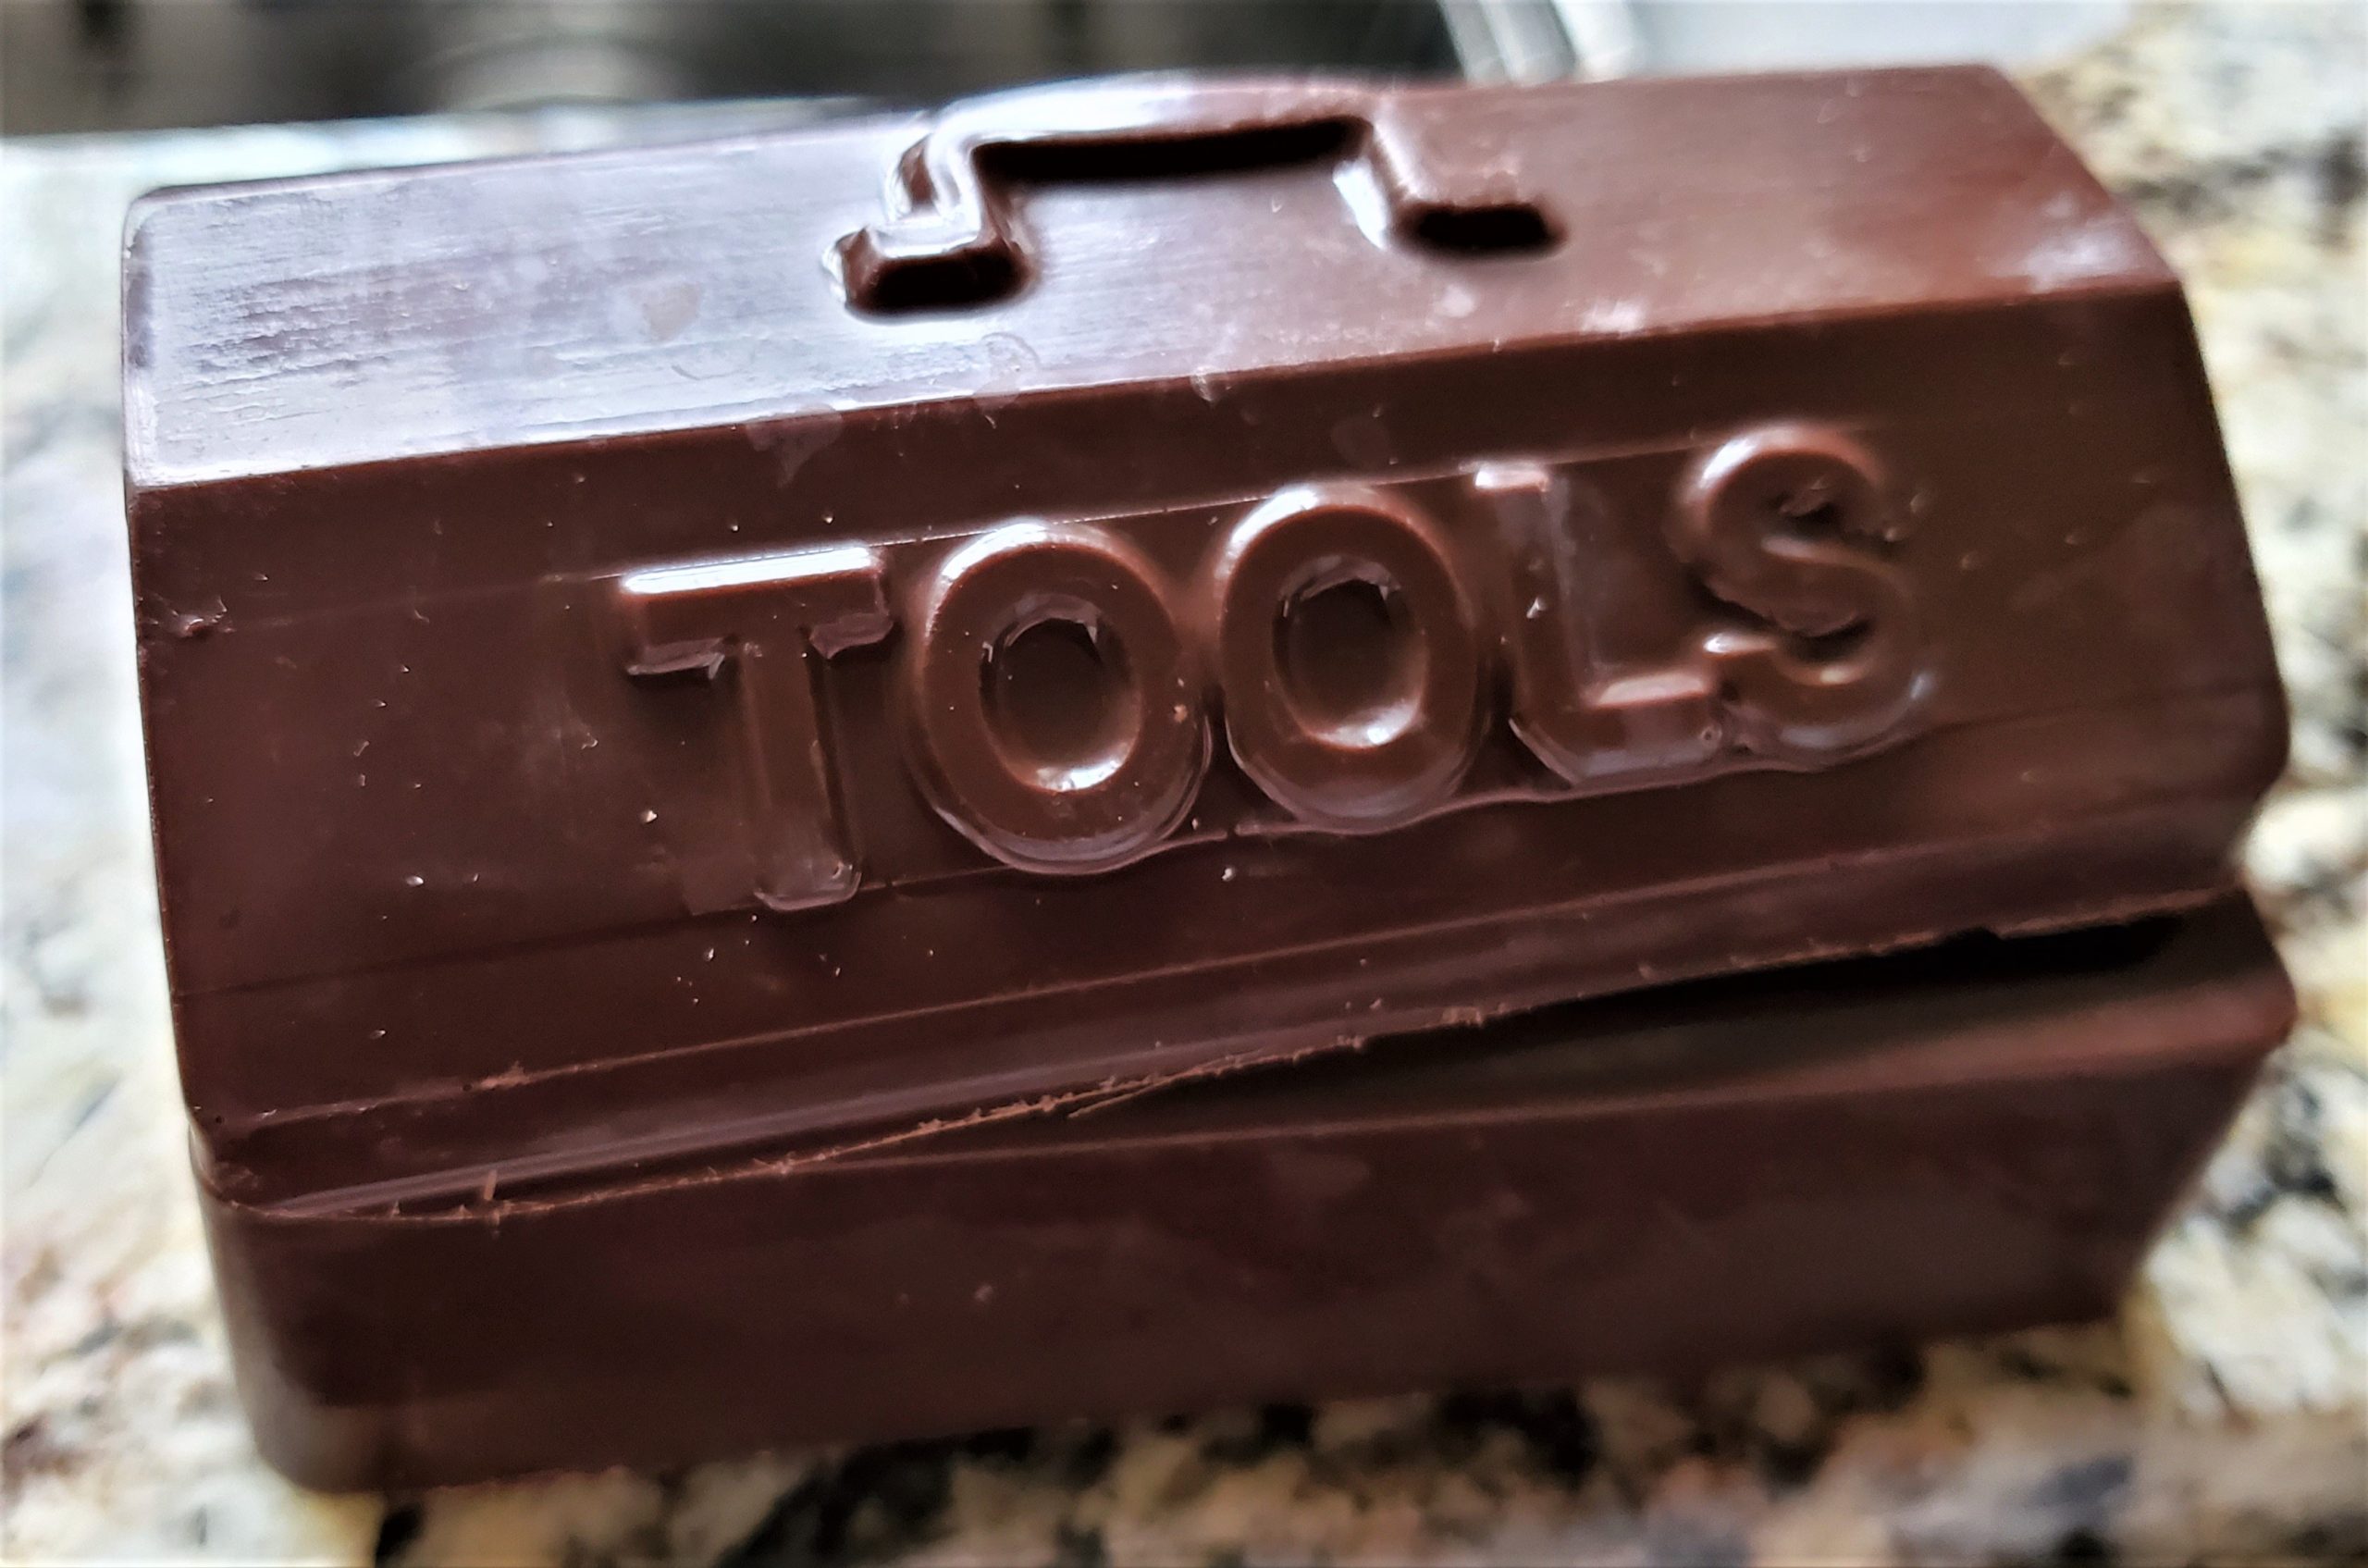 https://www.chocolategifts.com/wp-content/uploads/2019/08/tool-box-in-milk-with-lid-cracked-scaled.jpg